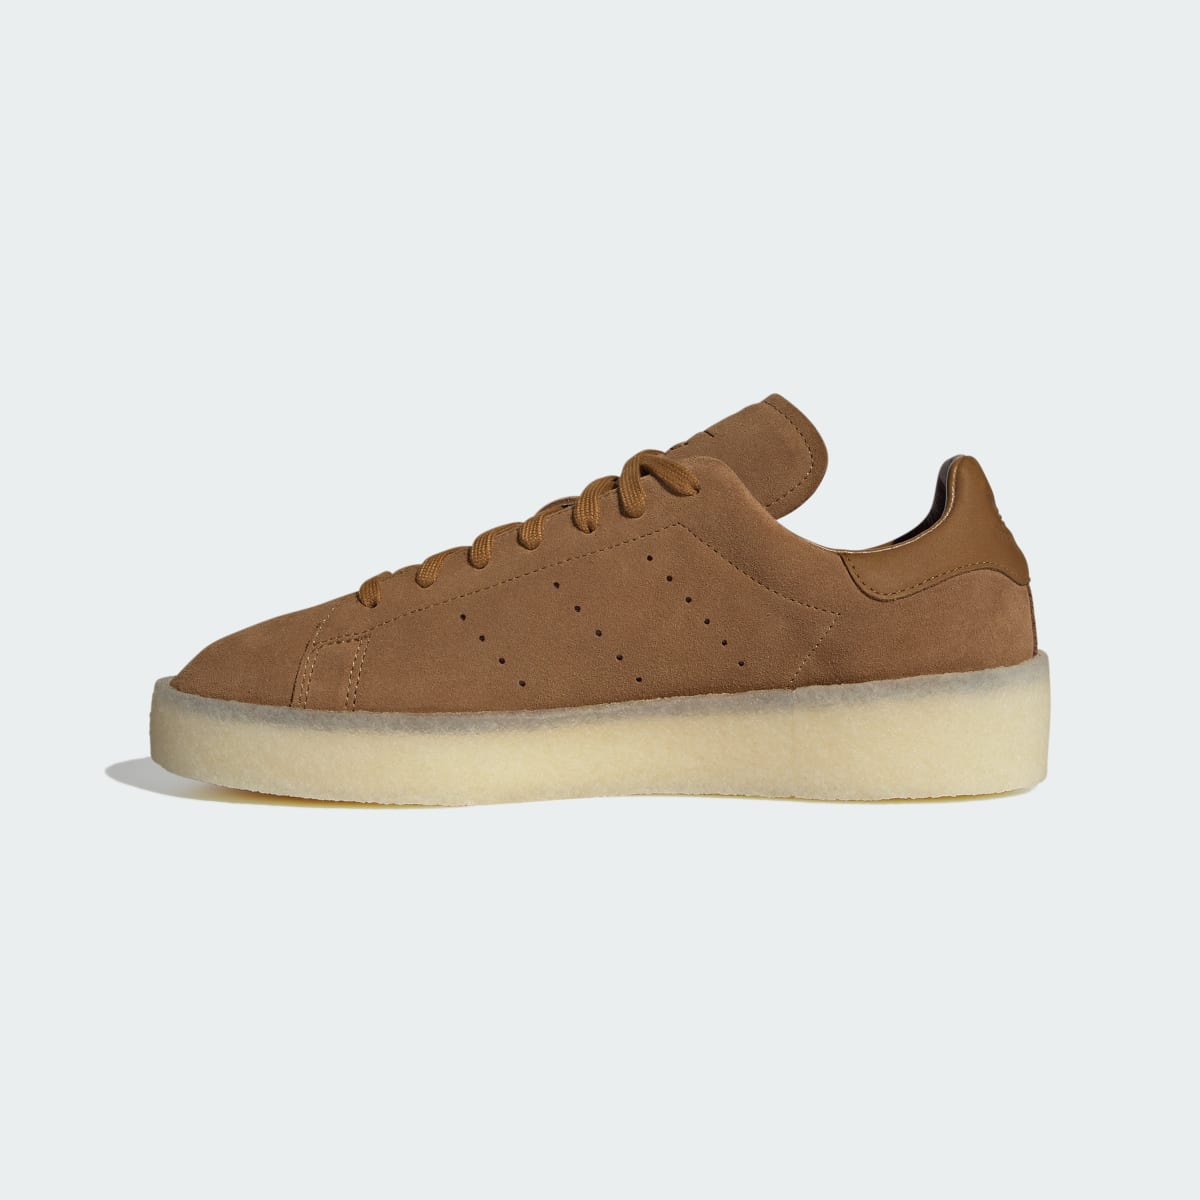 Adidas Stan Smith Crepe Shoes. 10